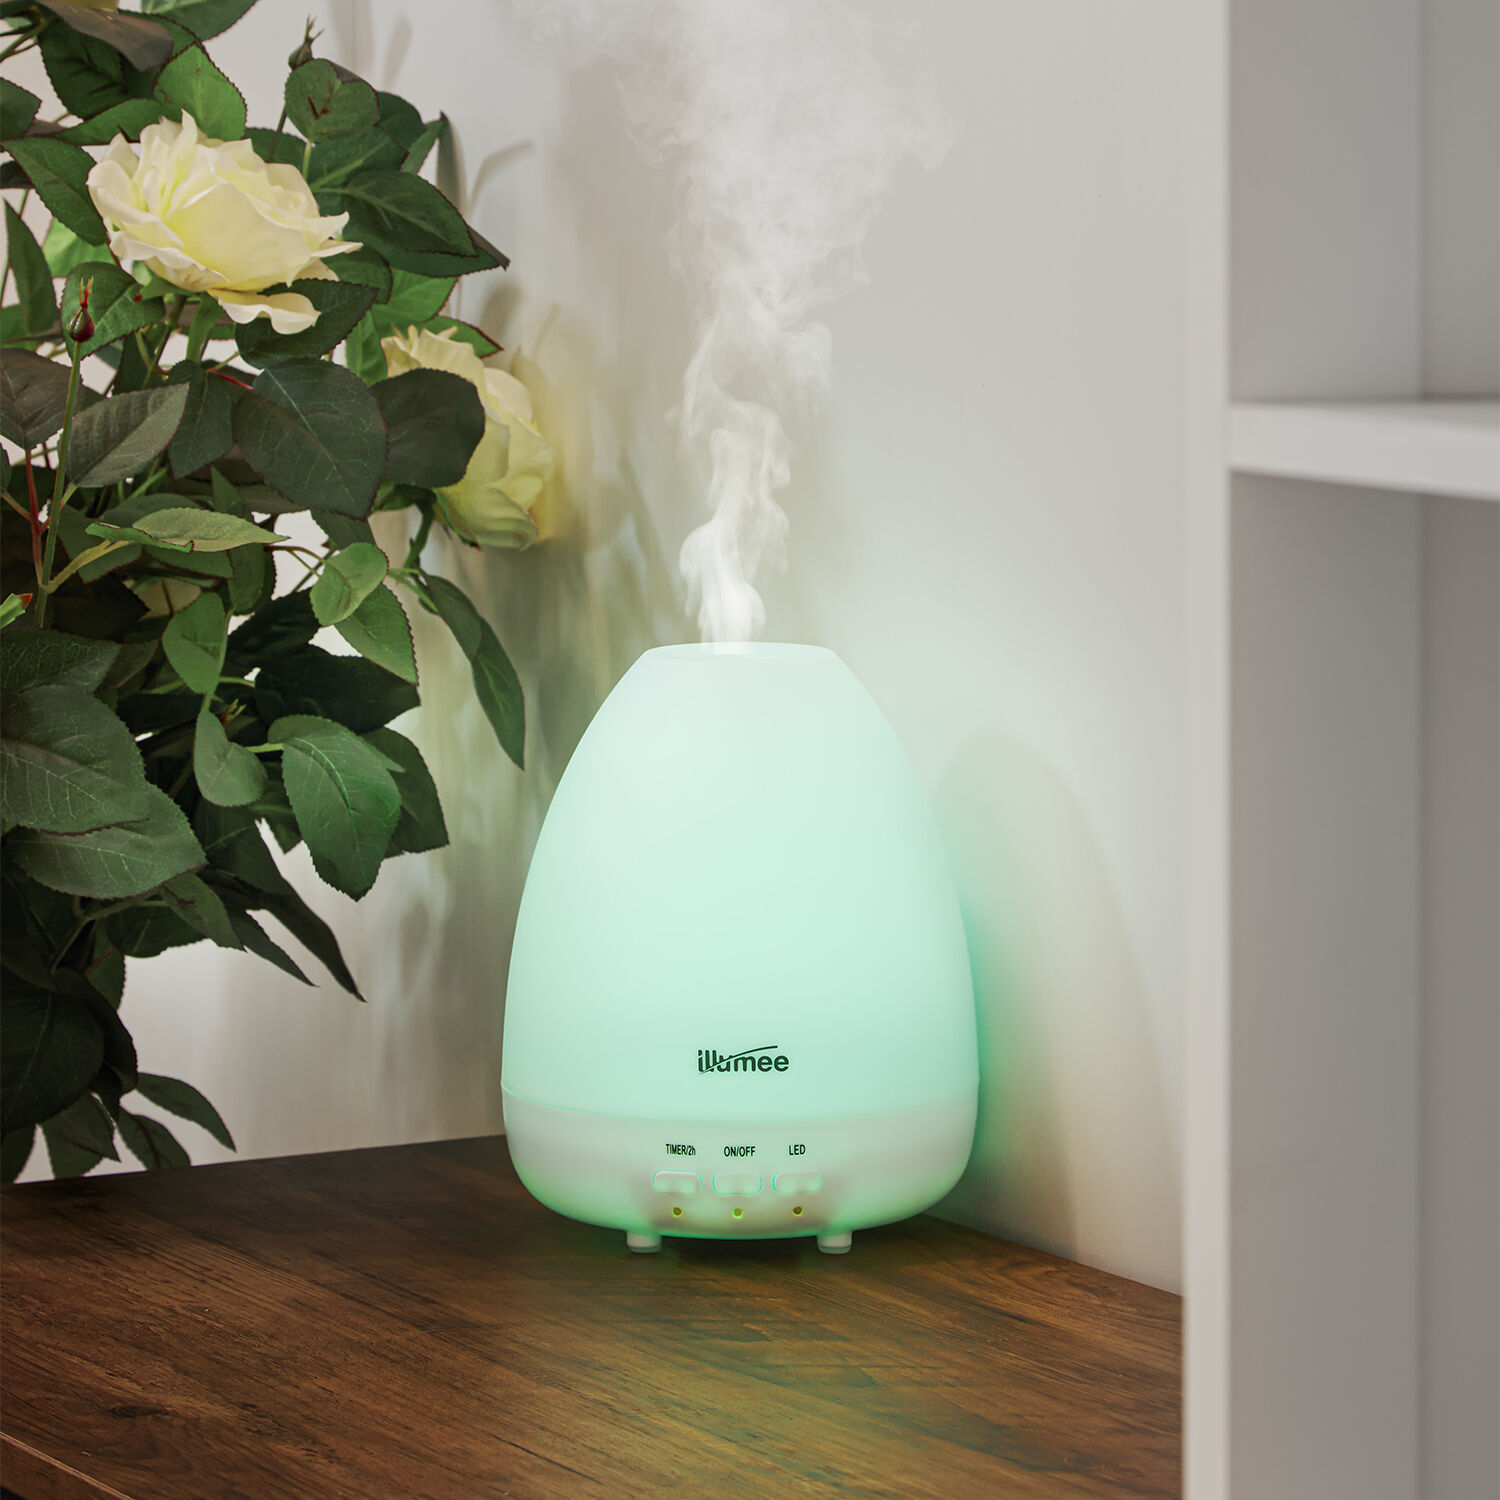 https://www.homestoreandmore.ie/dw/image/v2/BCBN_PRD/on/demandware.static/-/Sites-master/default/dwb294cb8d/images/Aroma-Diffuser-With-3-Essential-Oils-Pack-aroma-diffusers-essential-oils-073326-hi-res-4.jpg?sw=1500